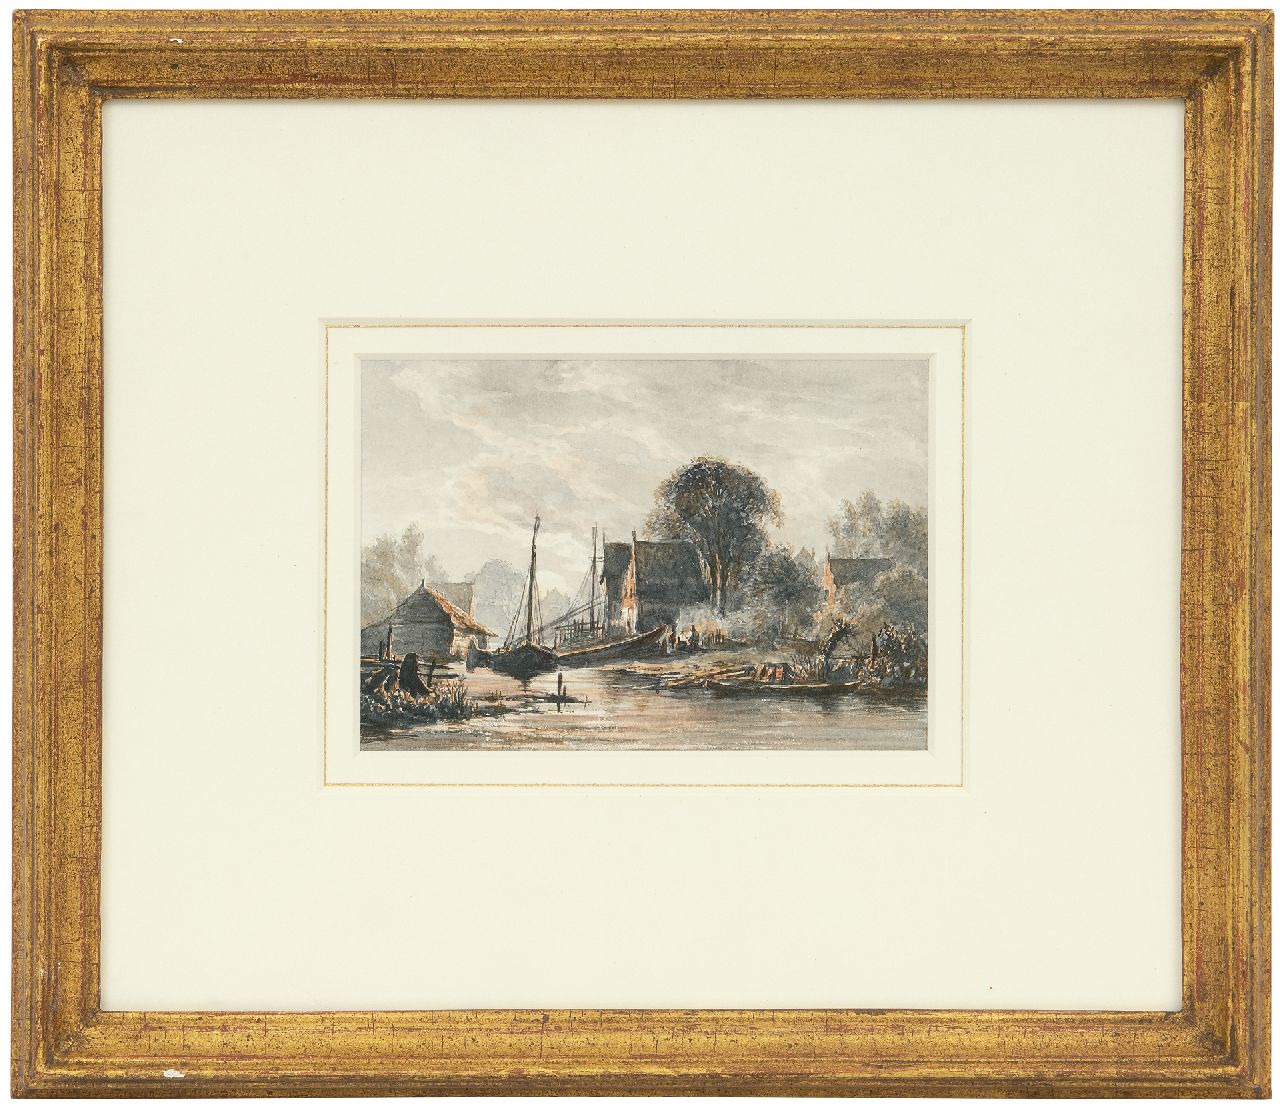 Abels J.Th.  | 'Jacobus' Theodorus Abels | Watercolours and drawings offered for sale | Moonlit shipyard, watercolour on paper 10.4 x 14.9 cm, signed on the reverse with monogram and dated 1856 on the reverse